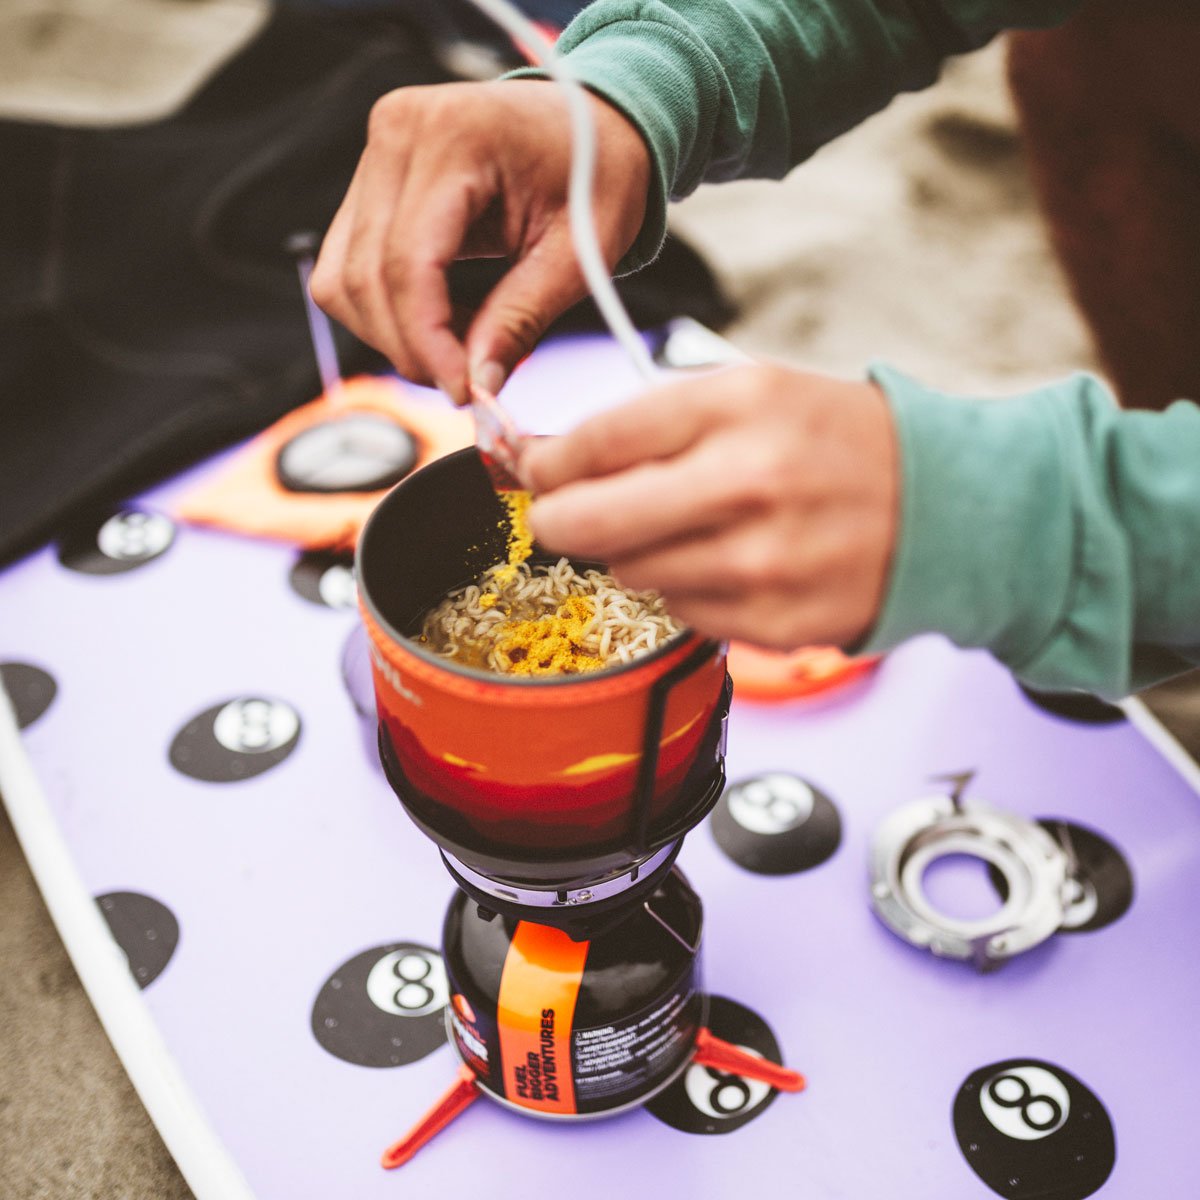 MiniMo Cooking System